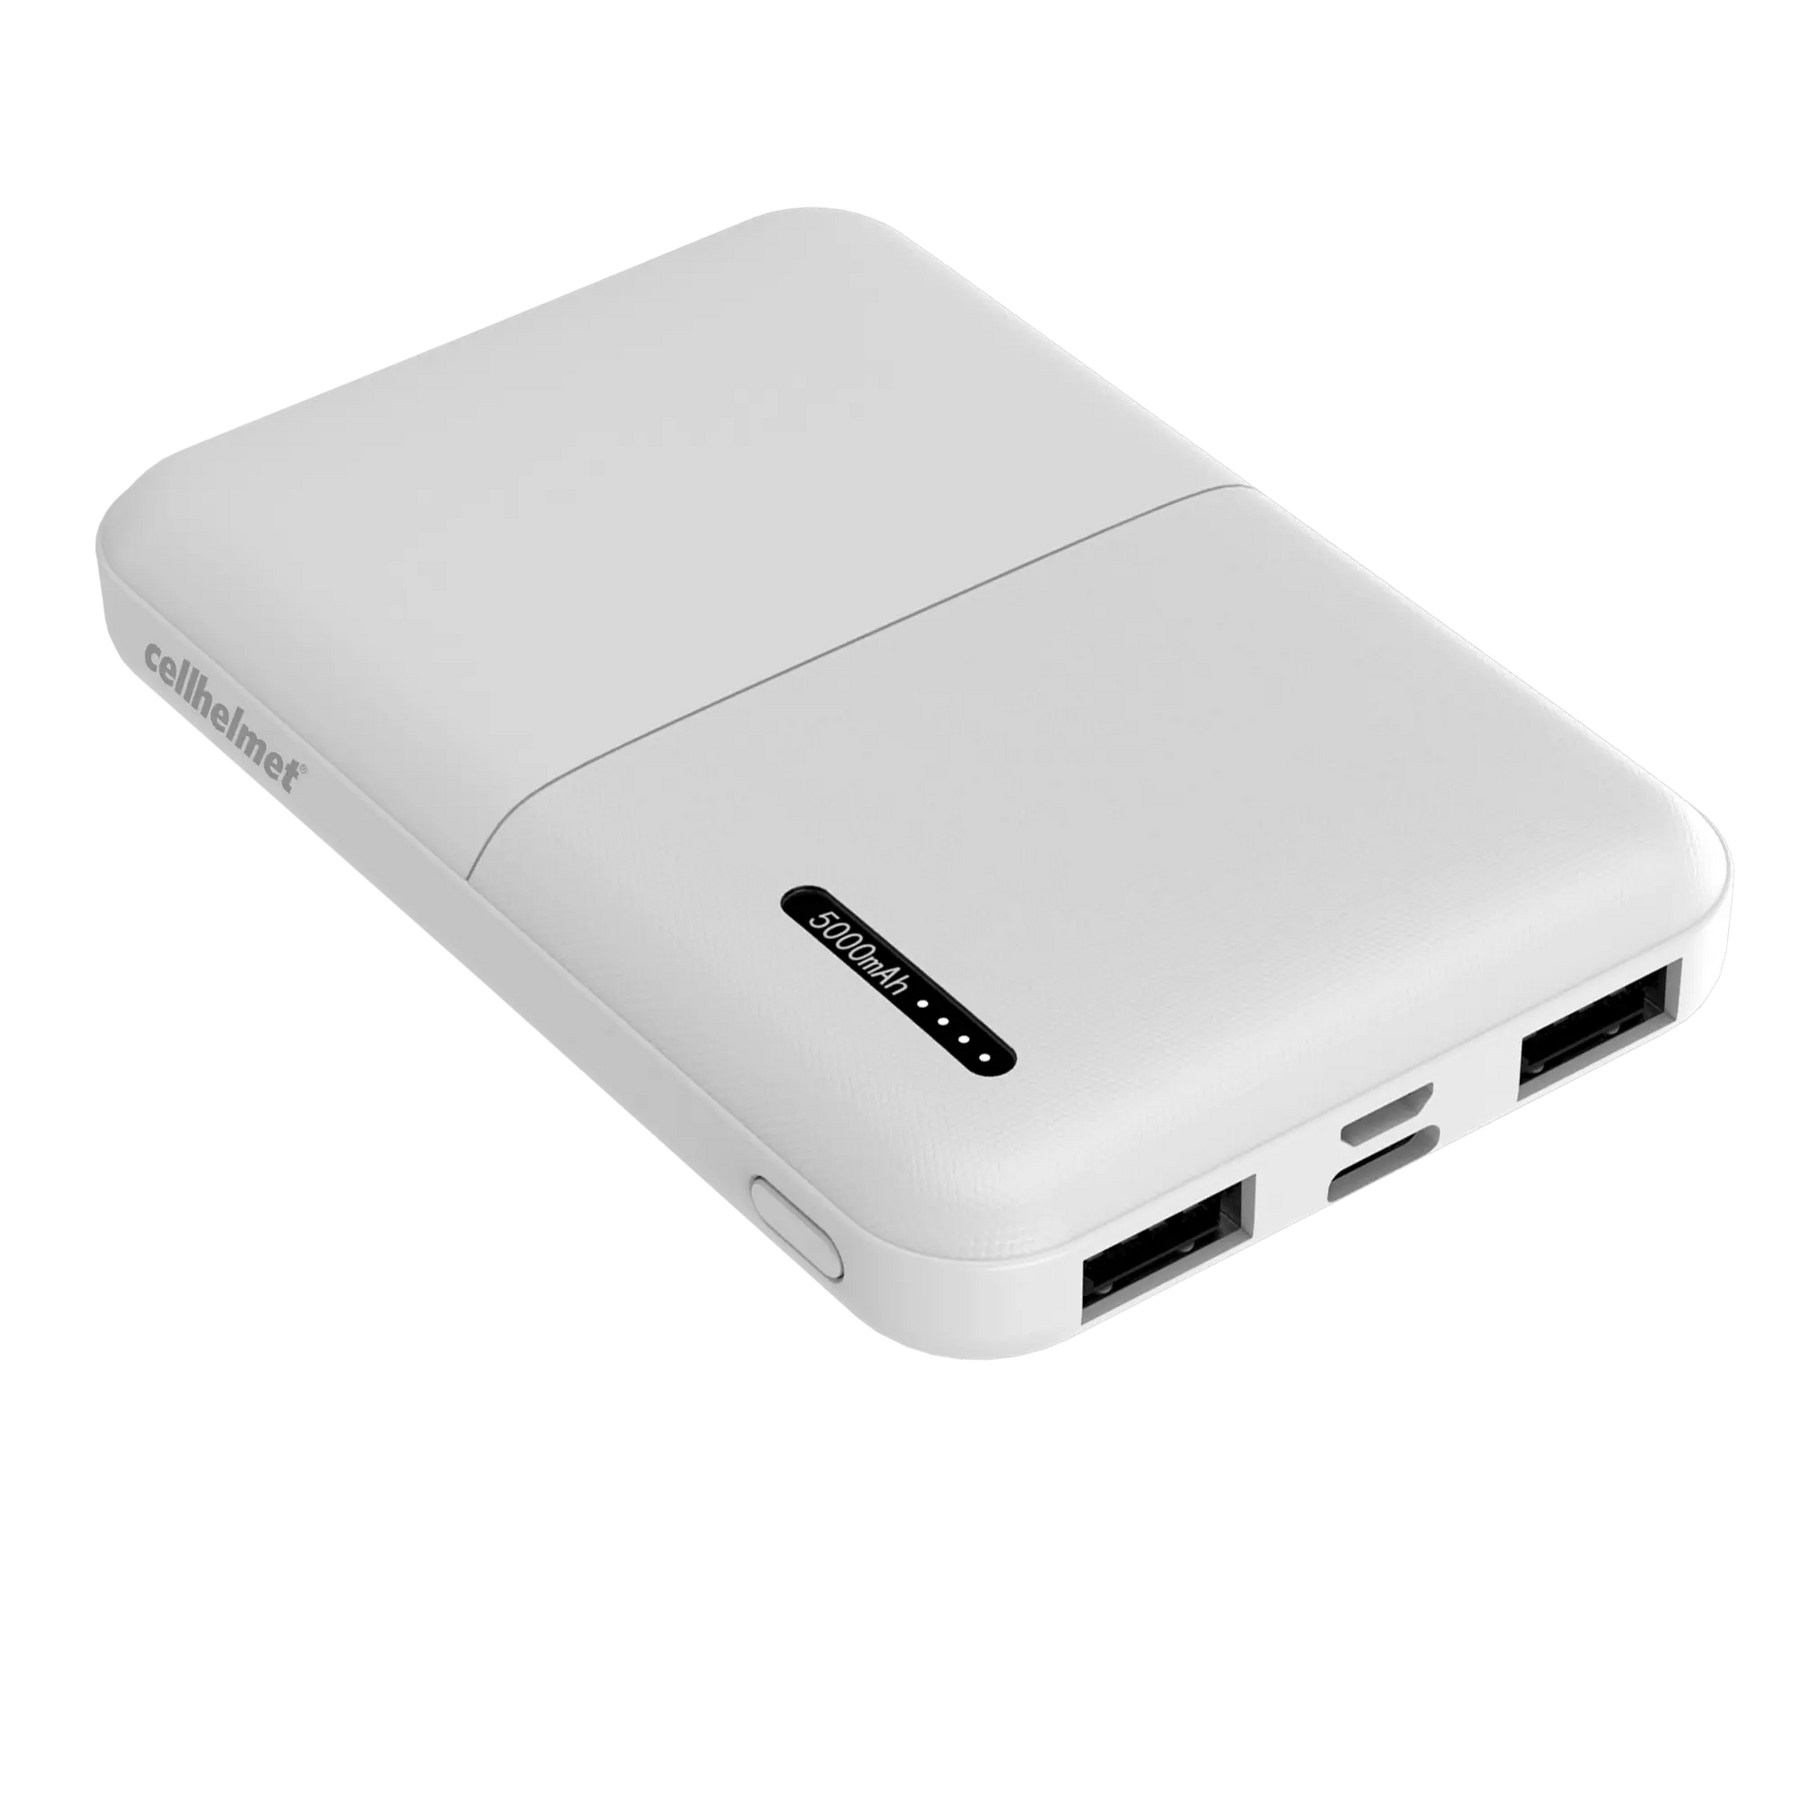 5K mAh Power Bank - Dual Type-A Ports and Single Type-C